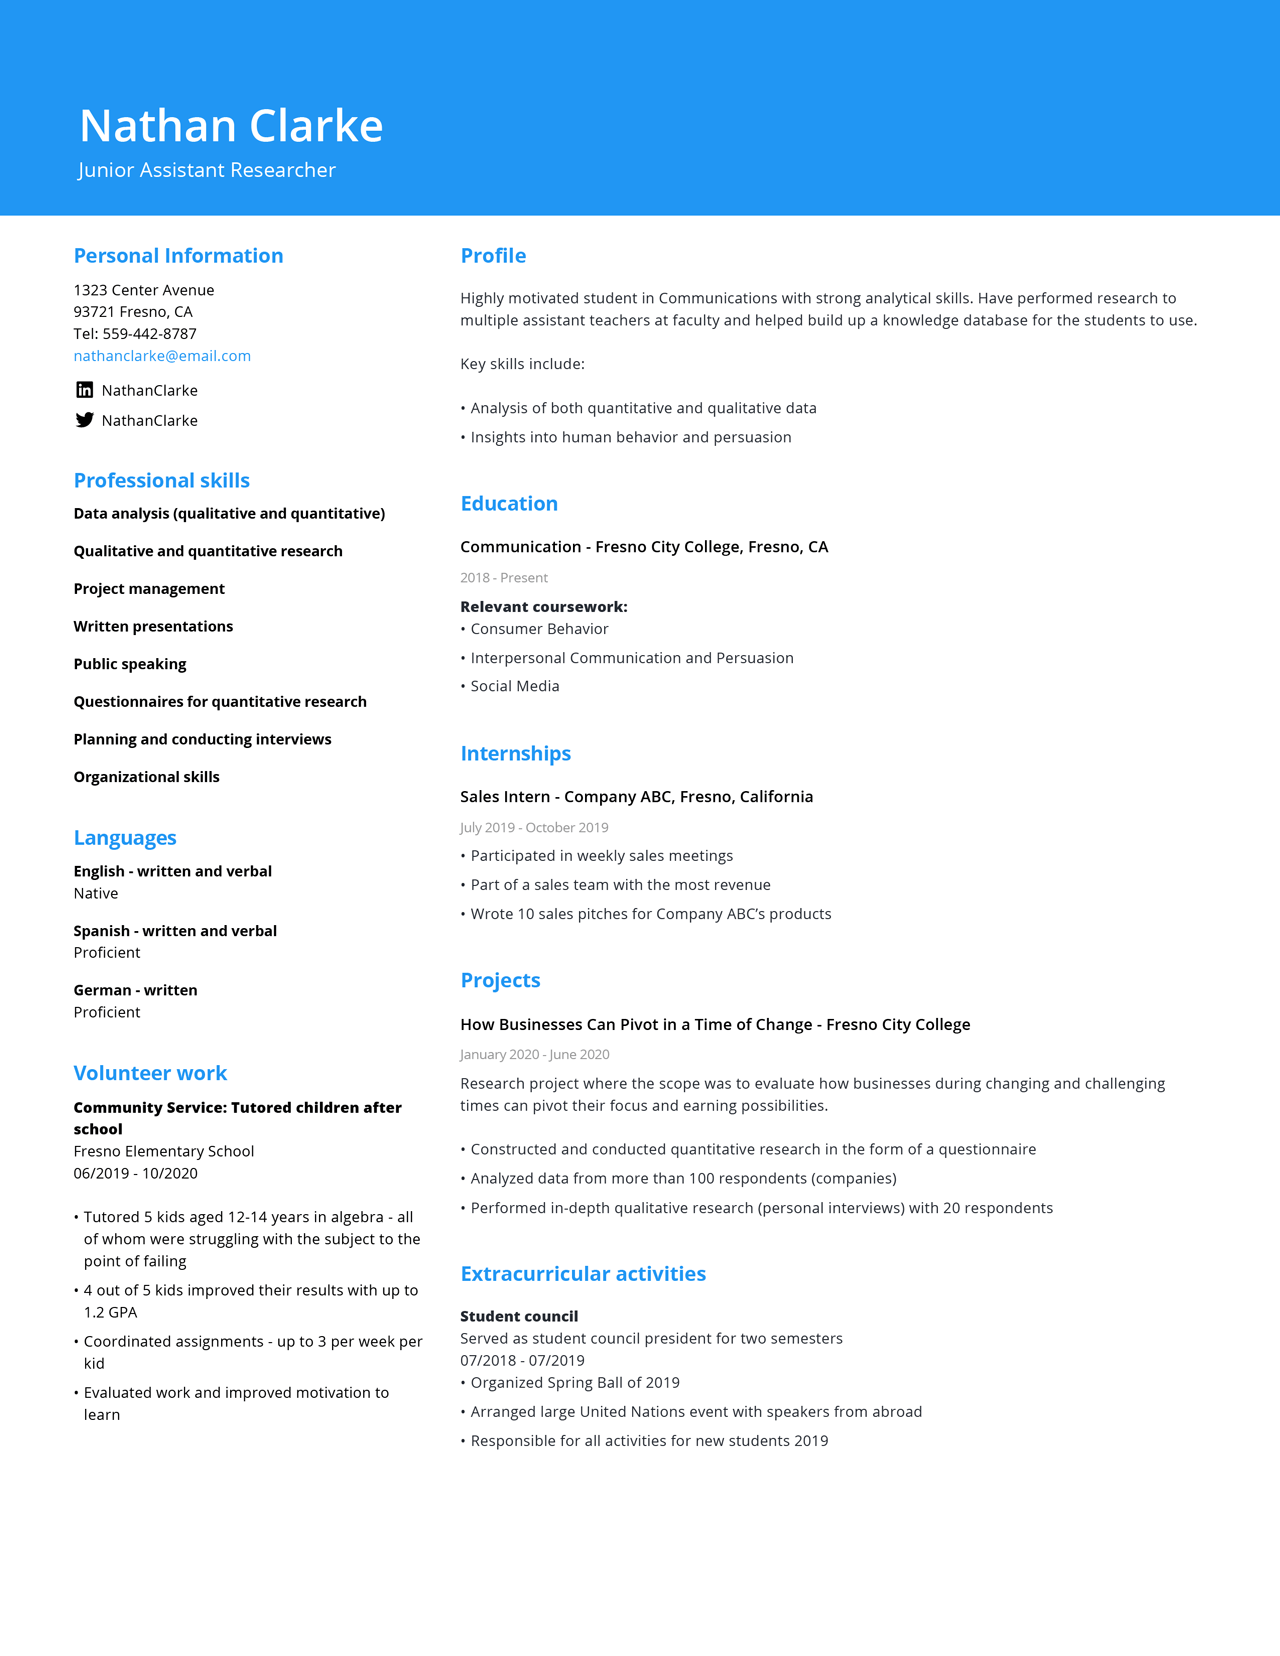 Image of a CV from a student with no work experience made with a student cv template